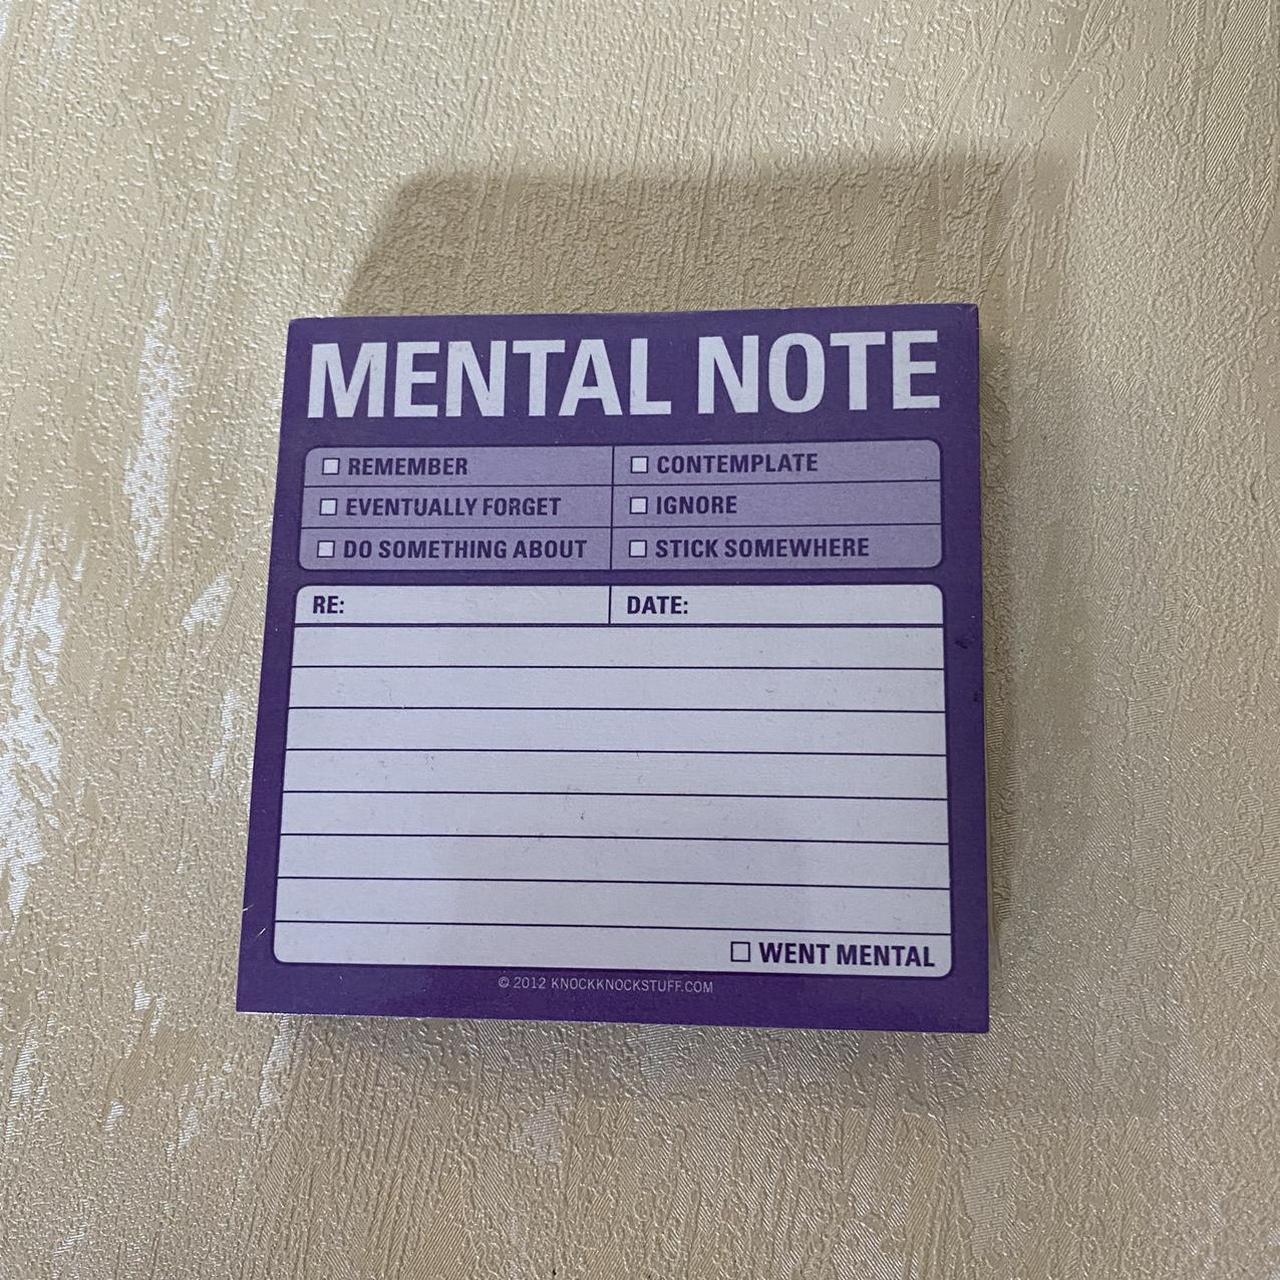 Product Image 1 - 🎄 Christmas Gifts 🎄

Mental Note